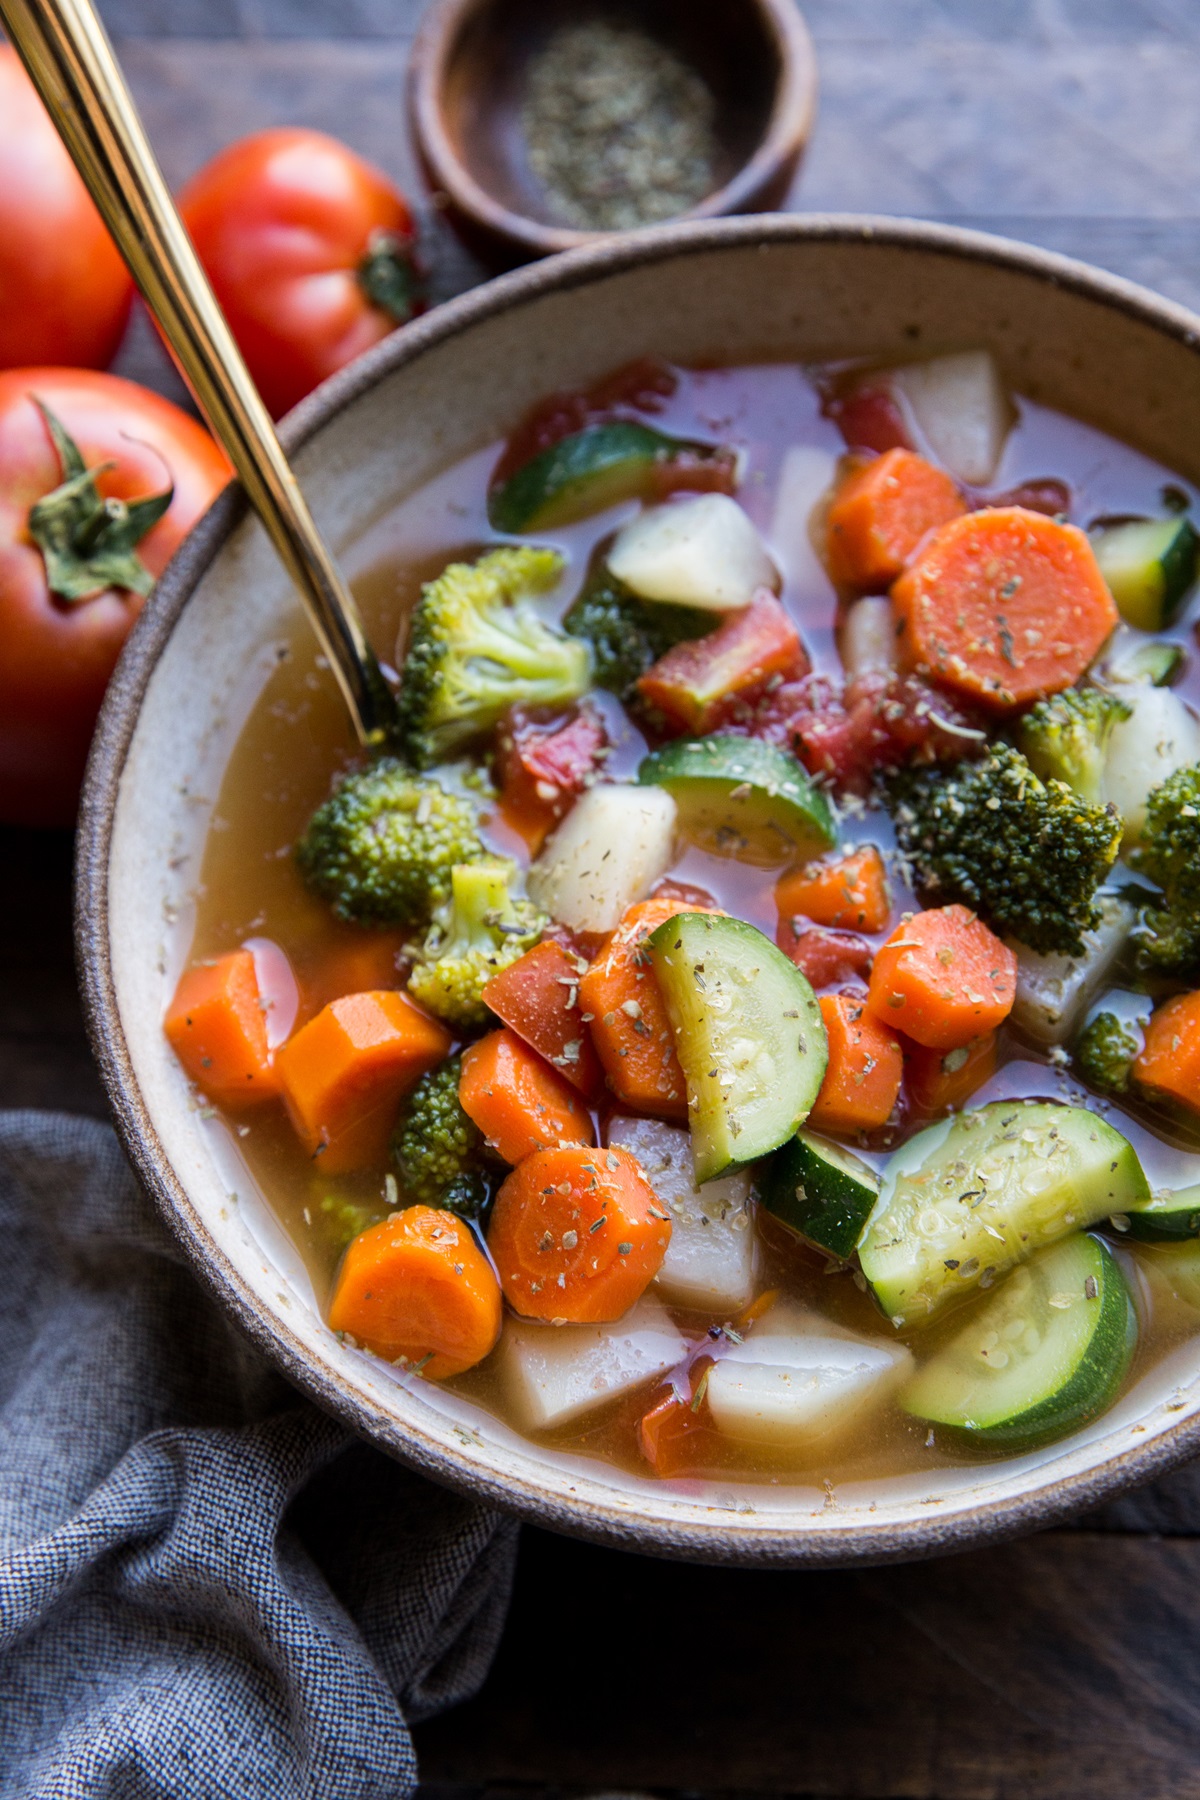 Big-Batch Vegetable Soup Recipe (With Video)